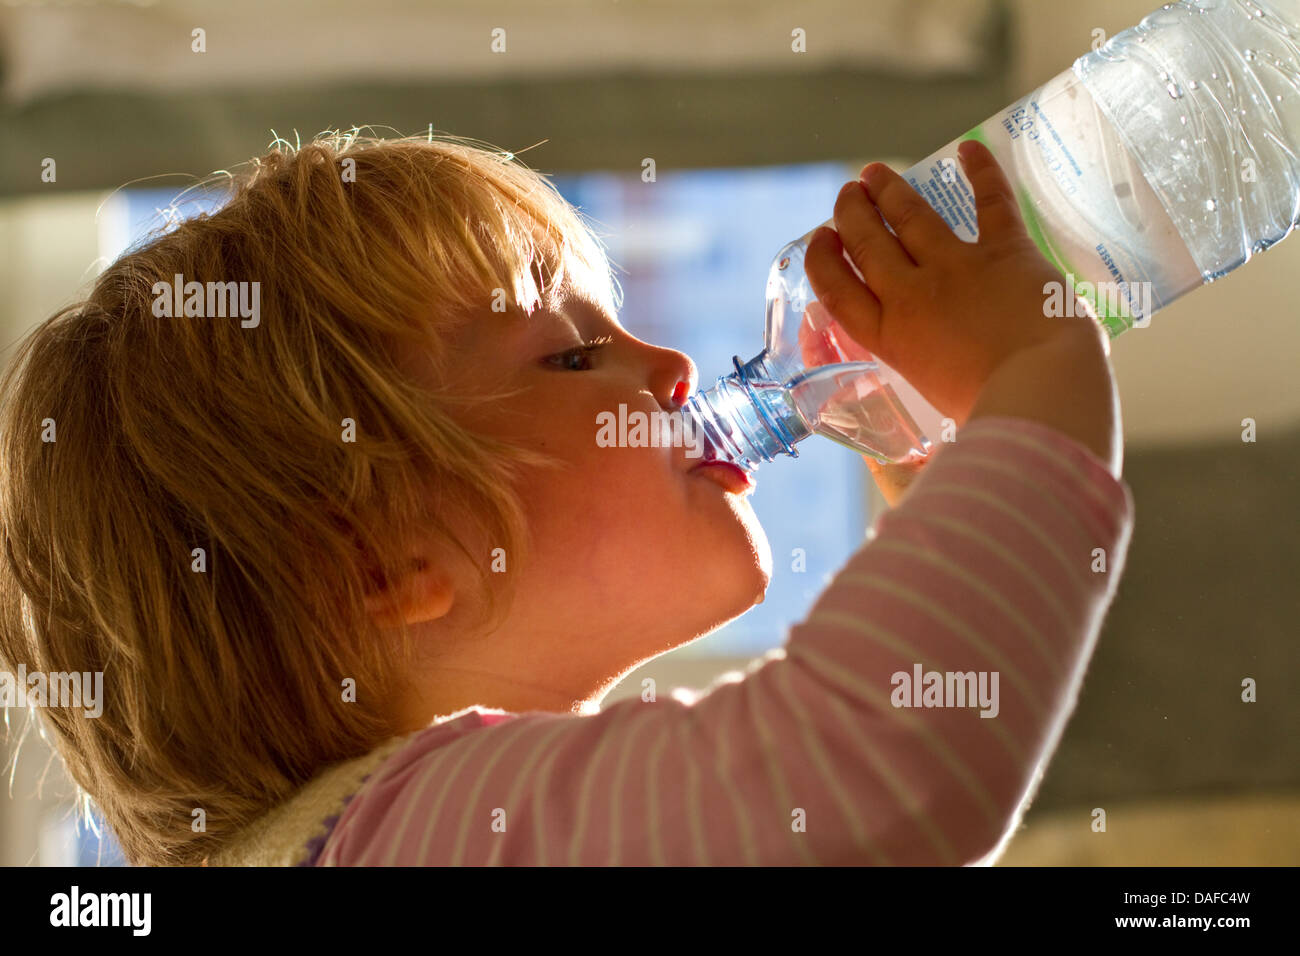 Girl drinking water from bottle, close up Stock Photo